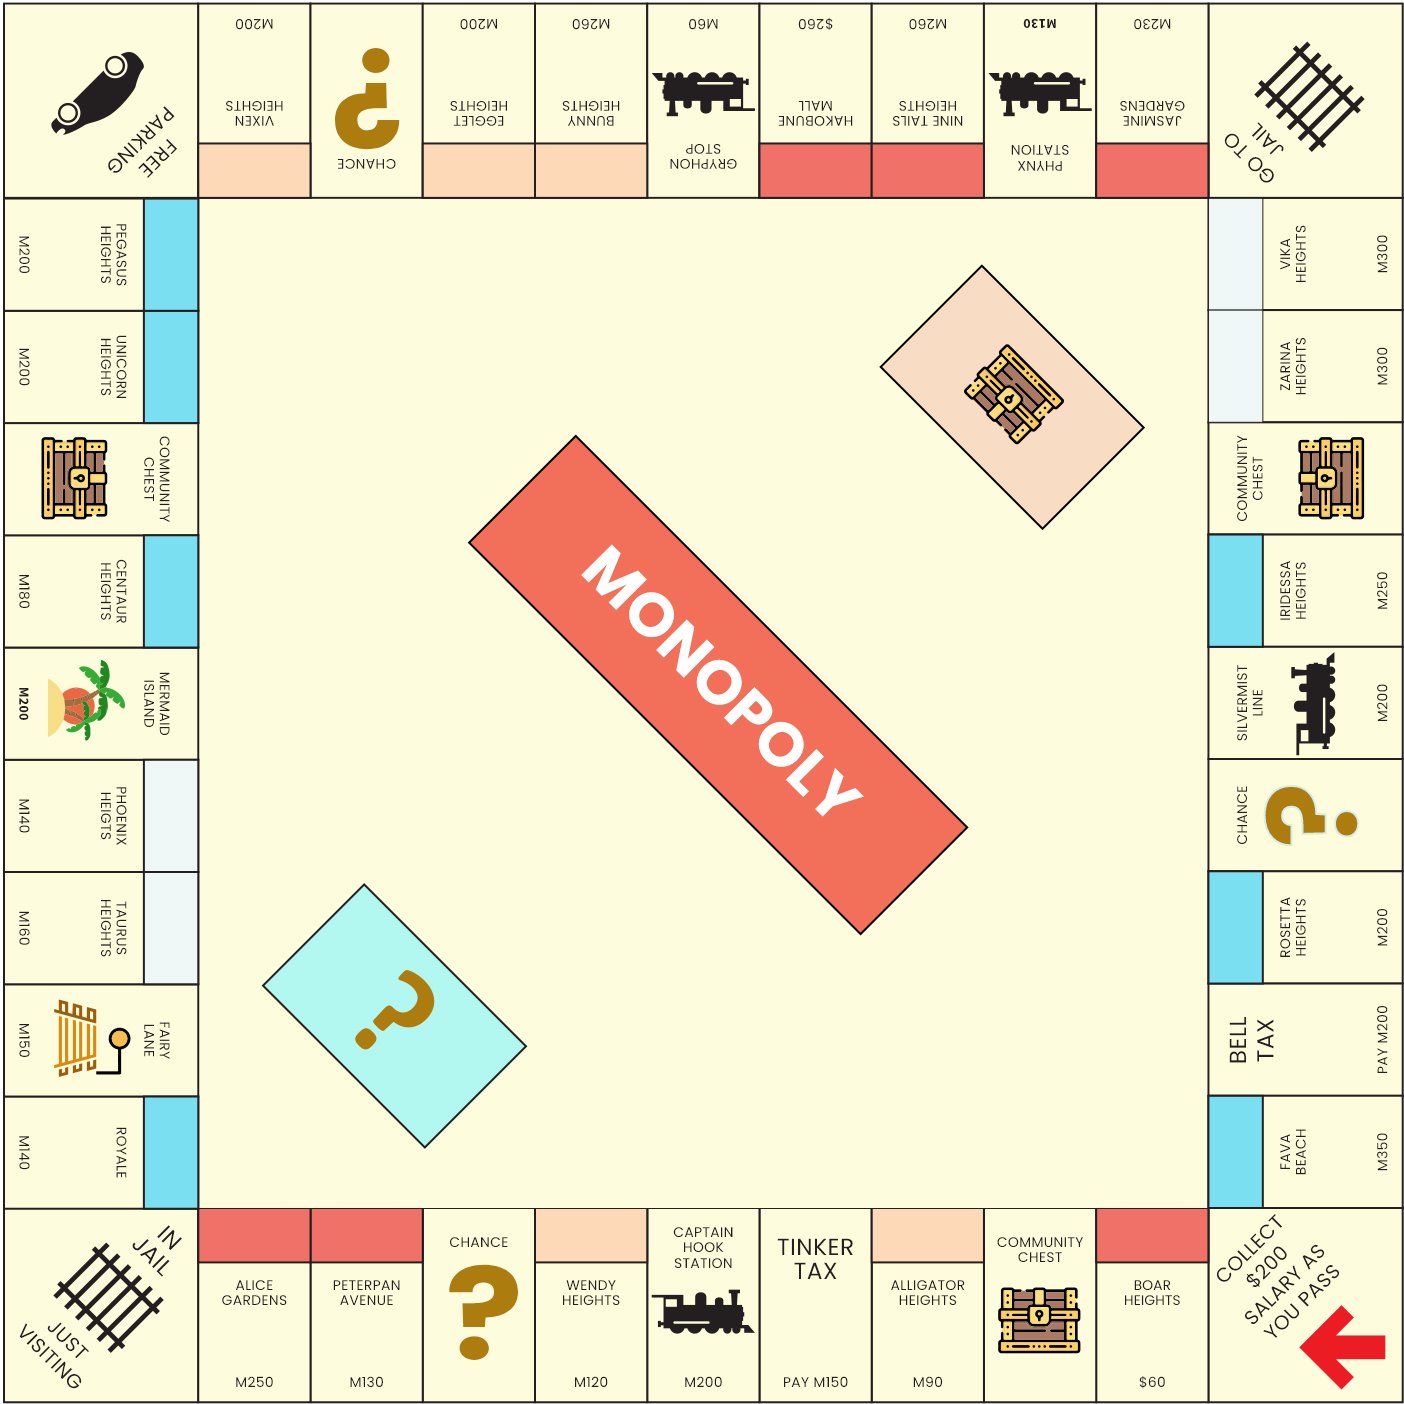 Free Monopoly Card Template Download in PDF, Illustrator, PSD, SVG